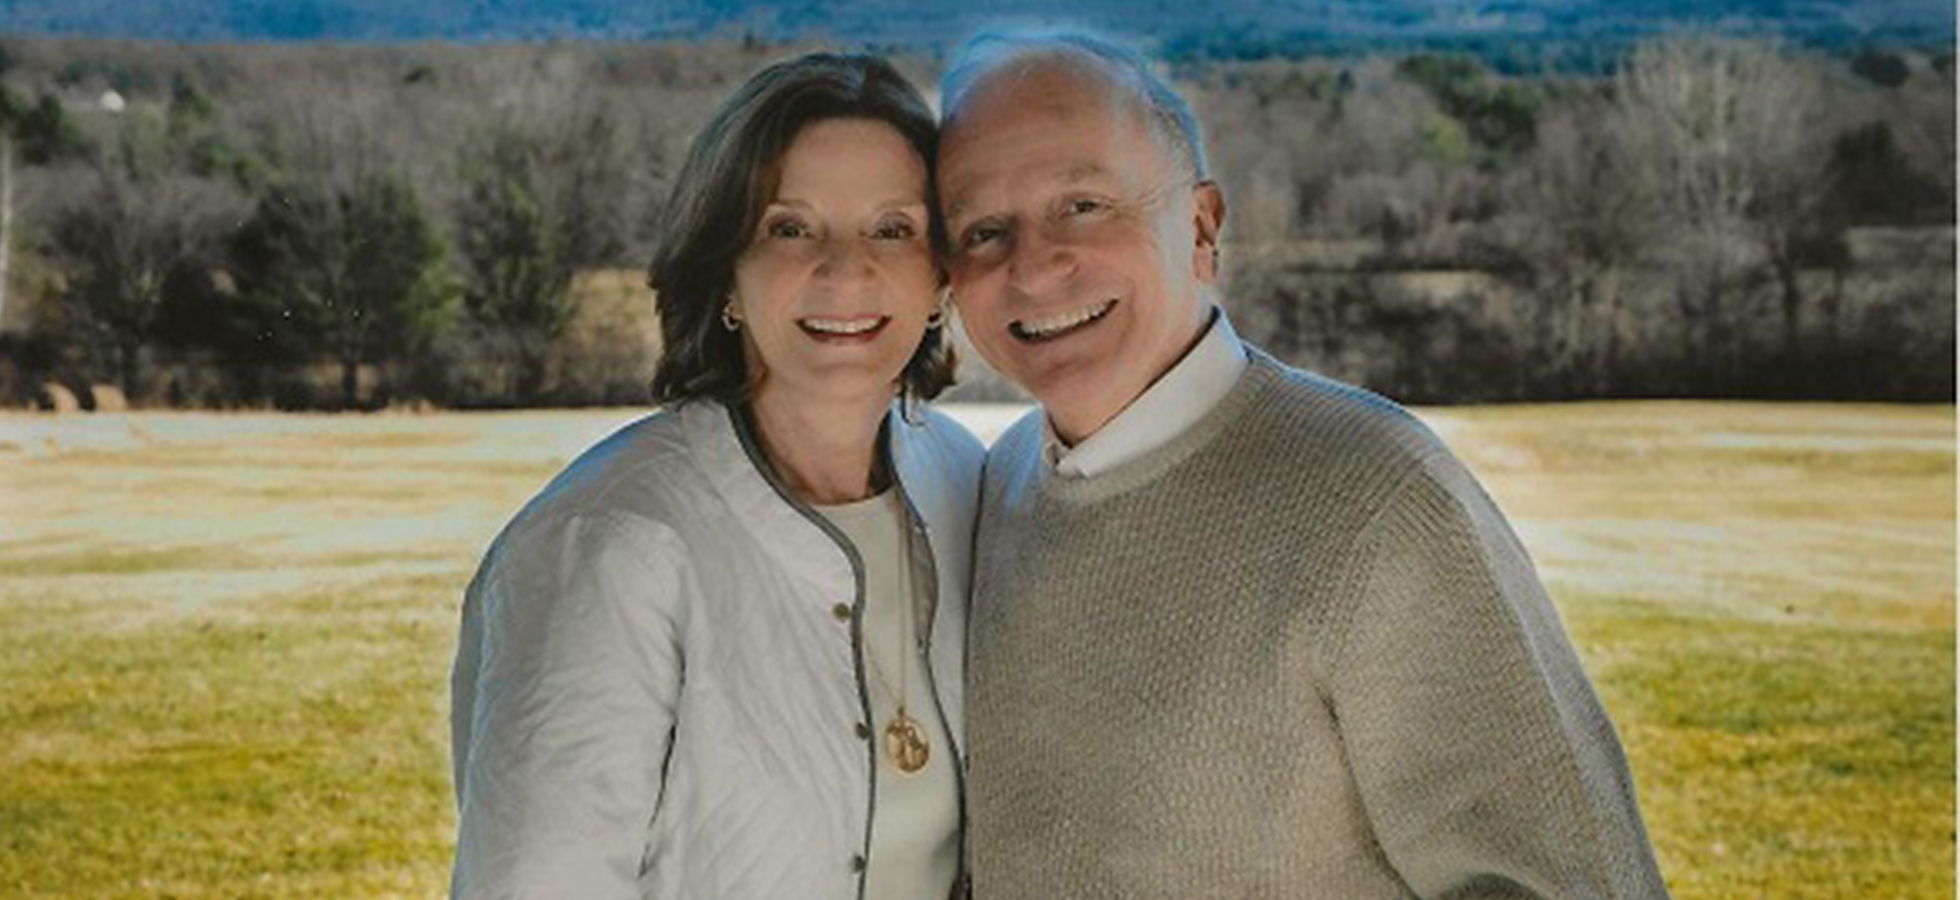 Photo of Don and Michele D'Amour for whom the Assumption University D'Amour College of Liberal Arts and Sciences is named